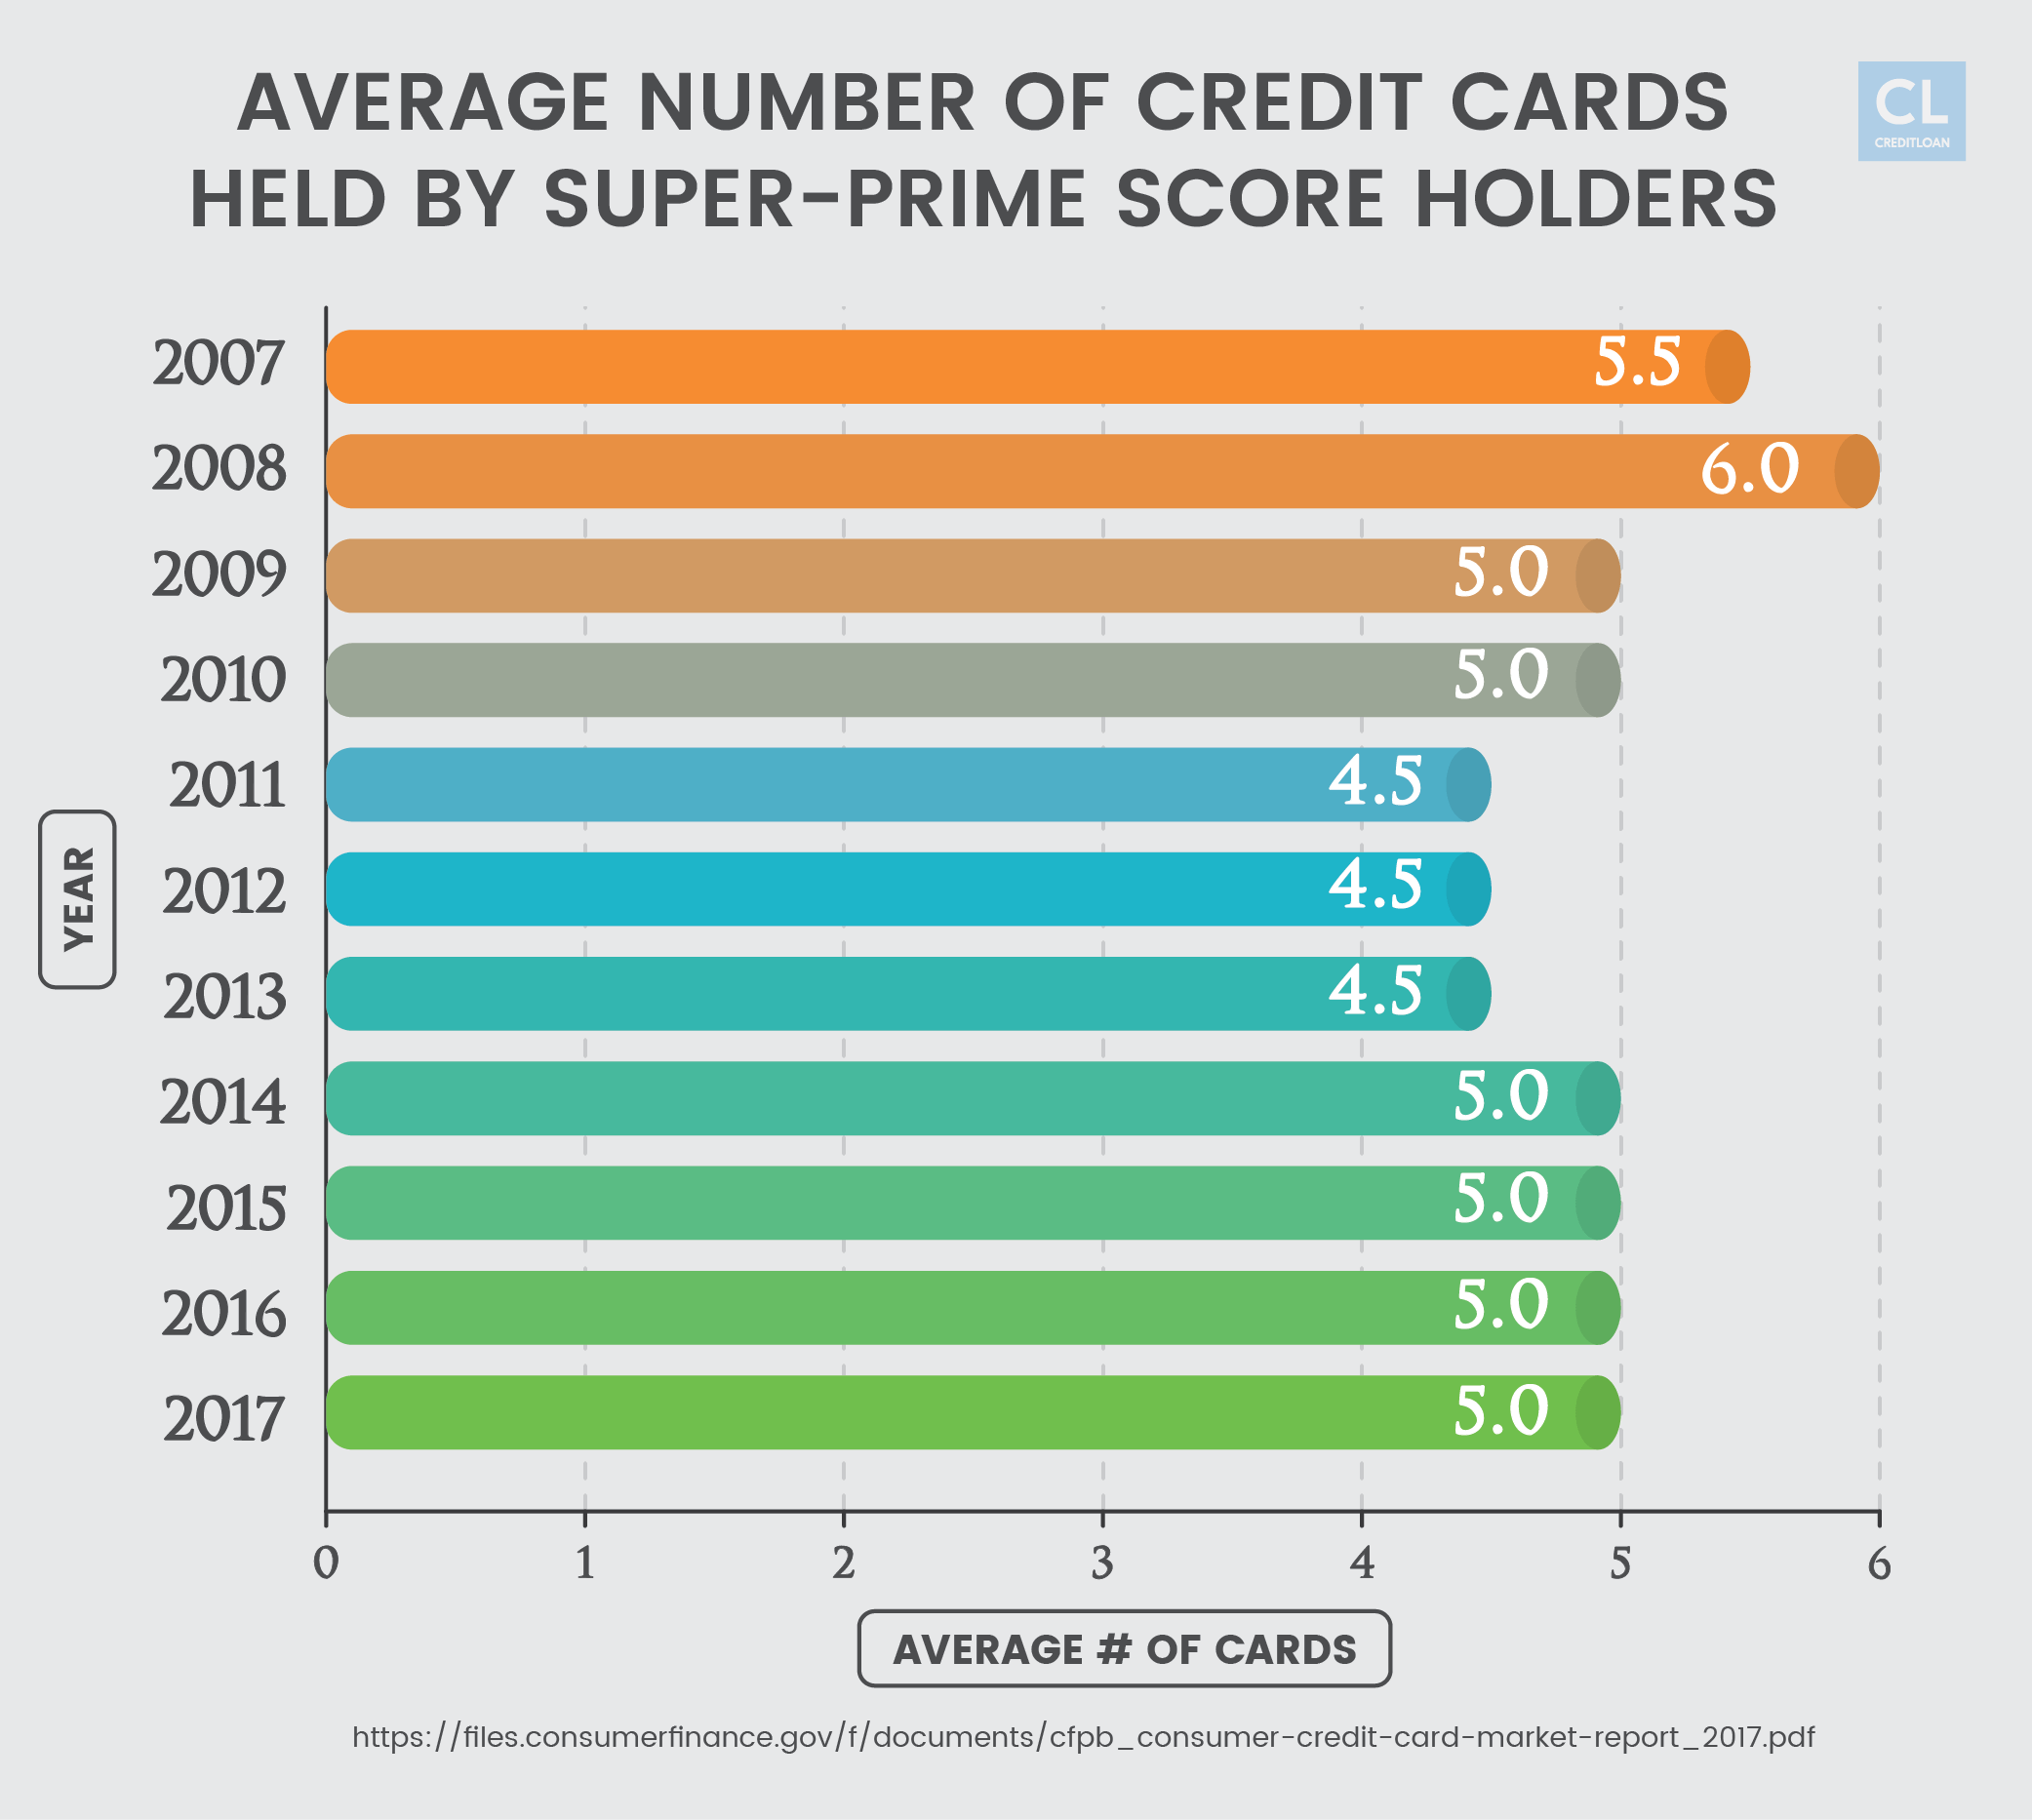 Credit Cards Held by Super-prime Score Holders from 2007-2017